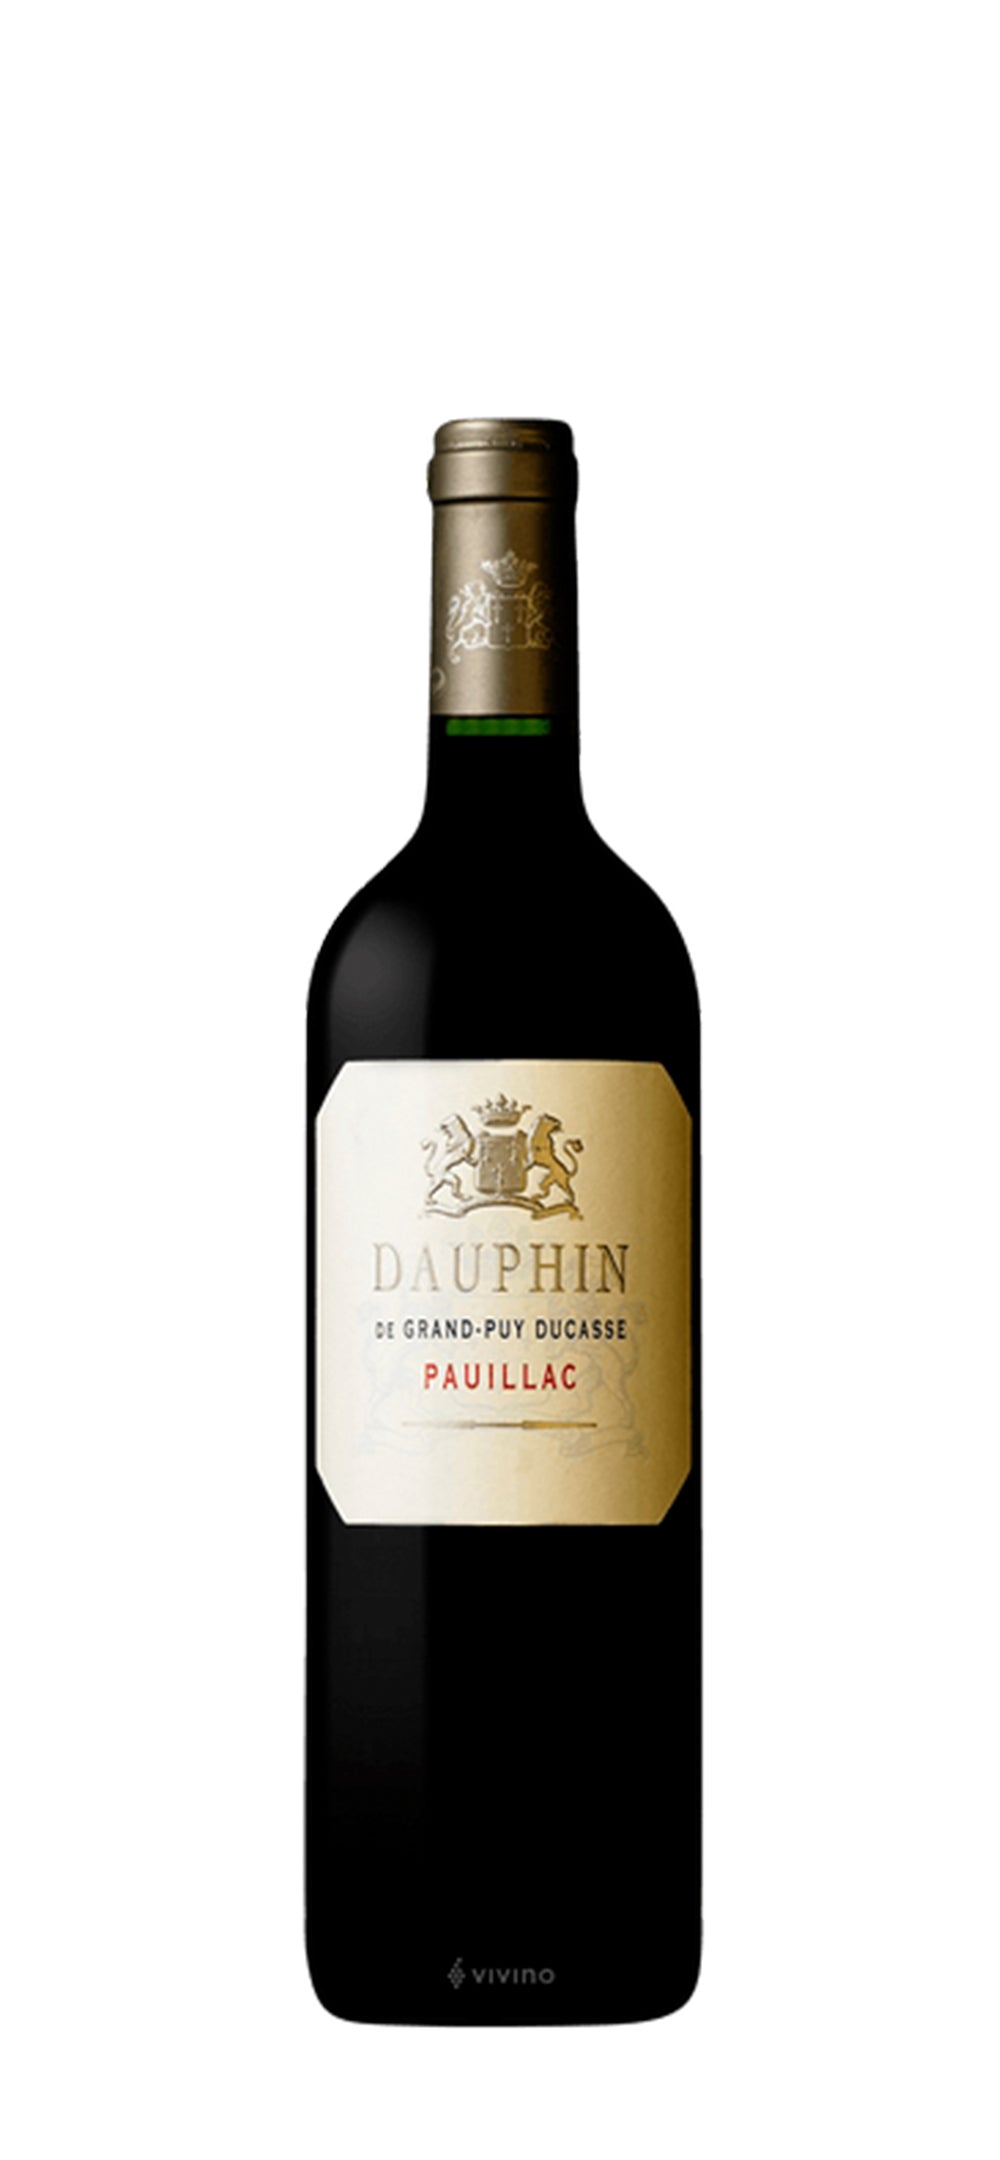 CHATEAU GRAND-PUY DUCASSE Dauphin Pauillac - 2015